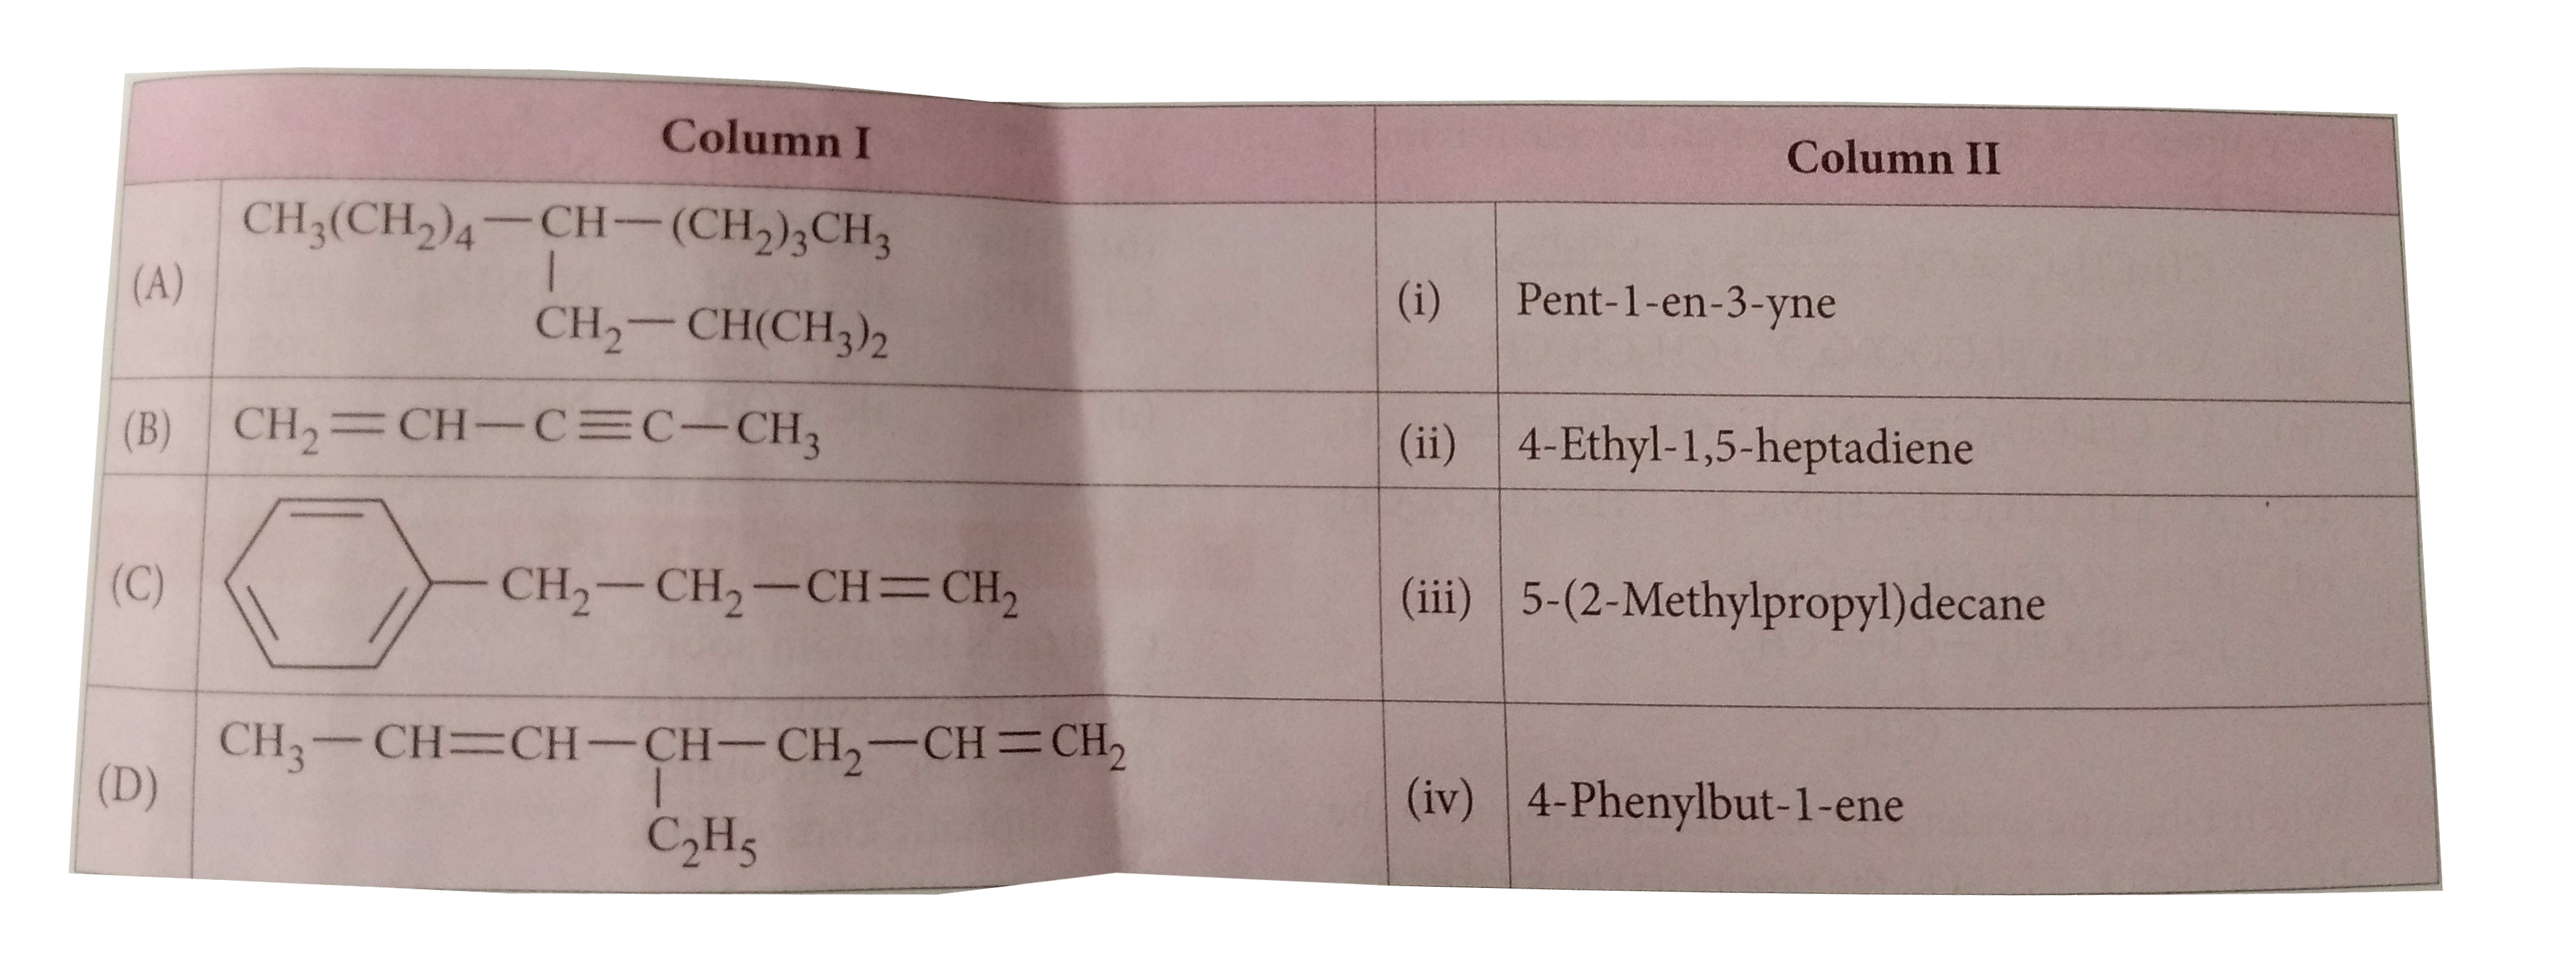 Match the column I with column II to give the correct IUPAC names and mark the appropriate choice.